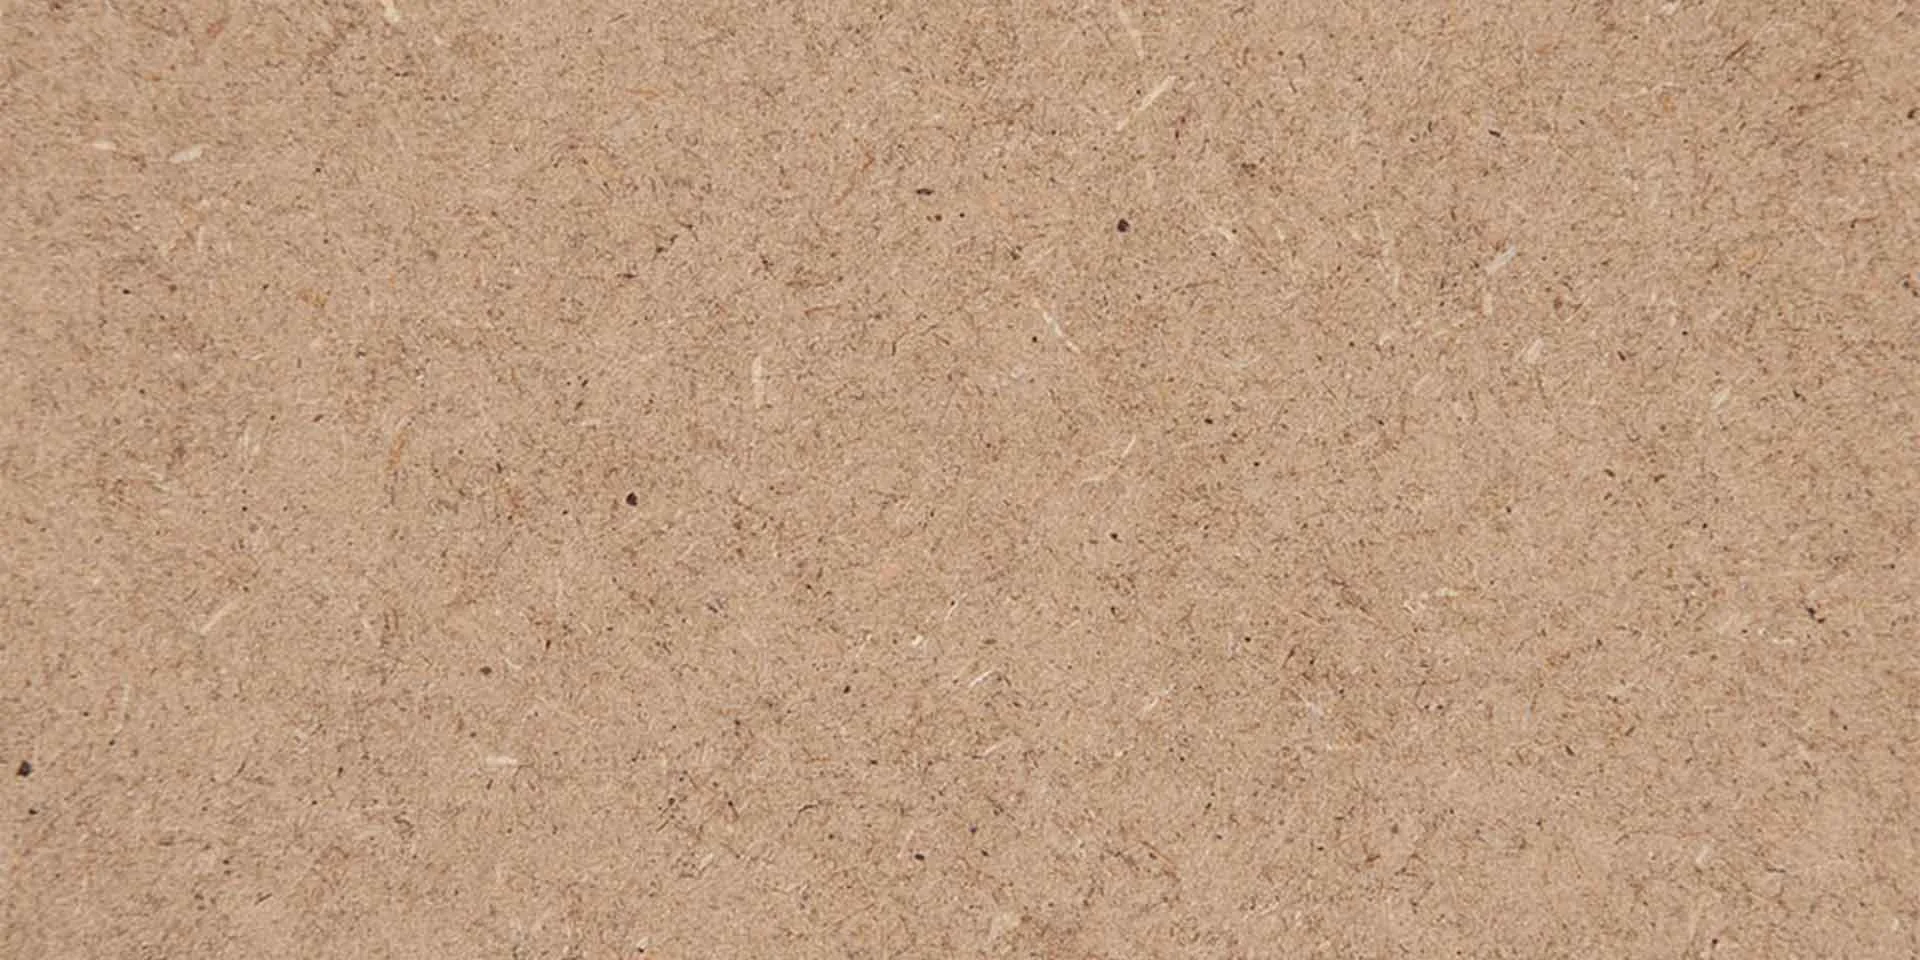 TSFC002 in MDF natural